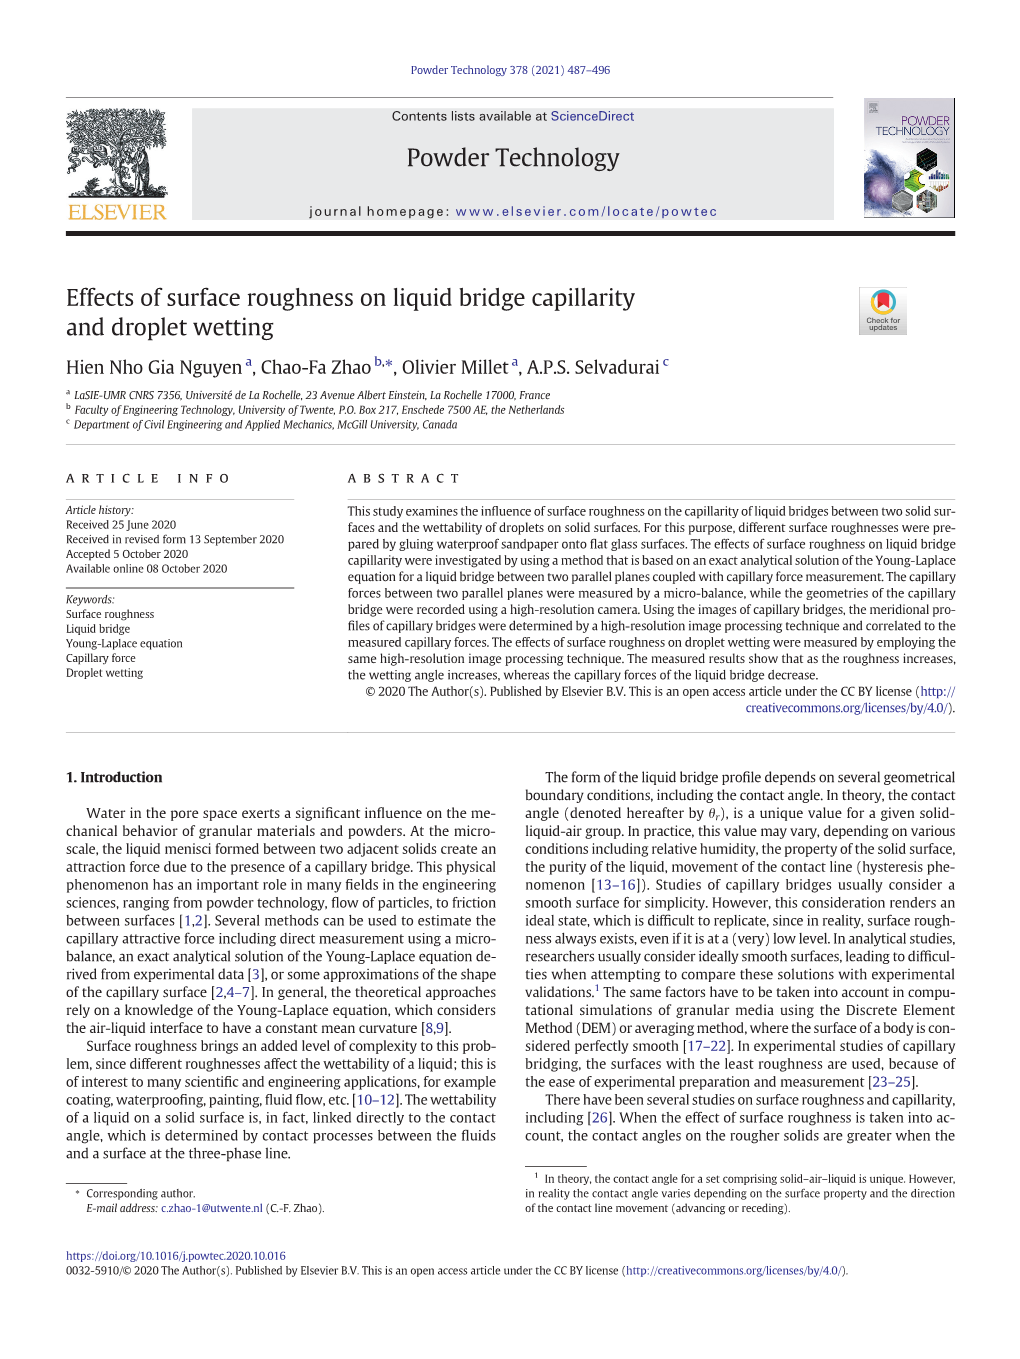 Effects of Surface Roughness on Liquid Bridge Capillarity and Droplet Wetting